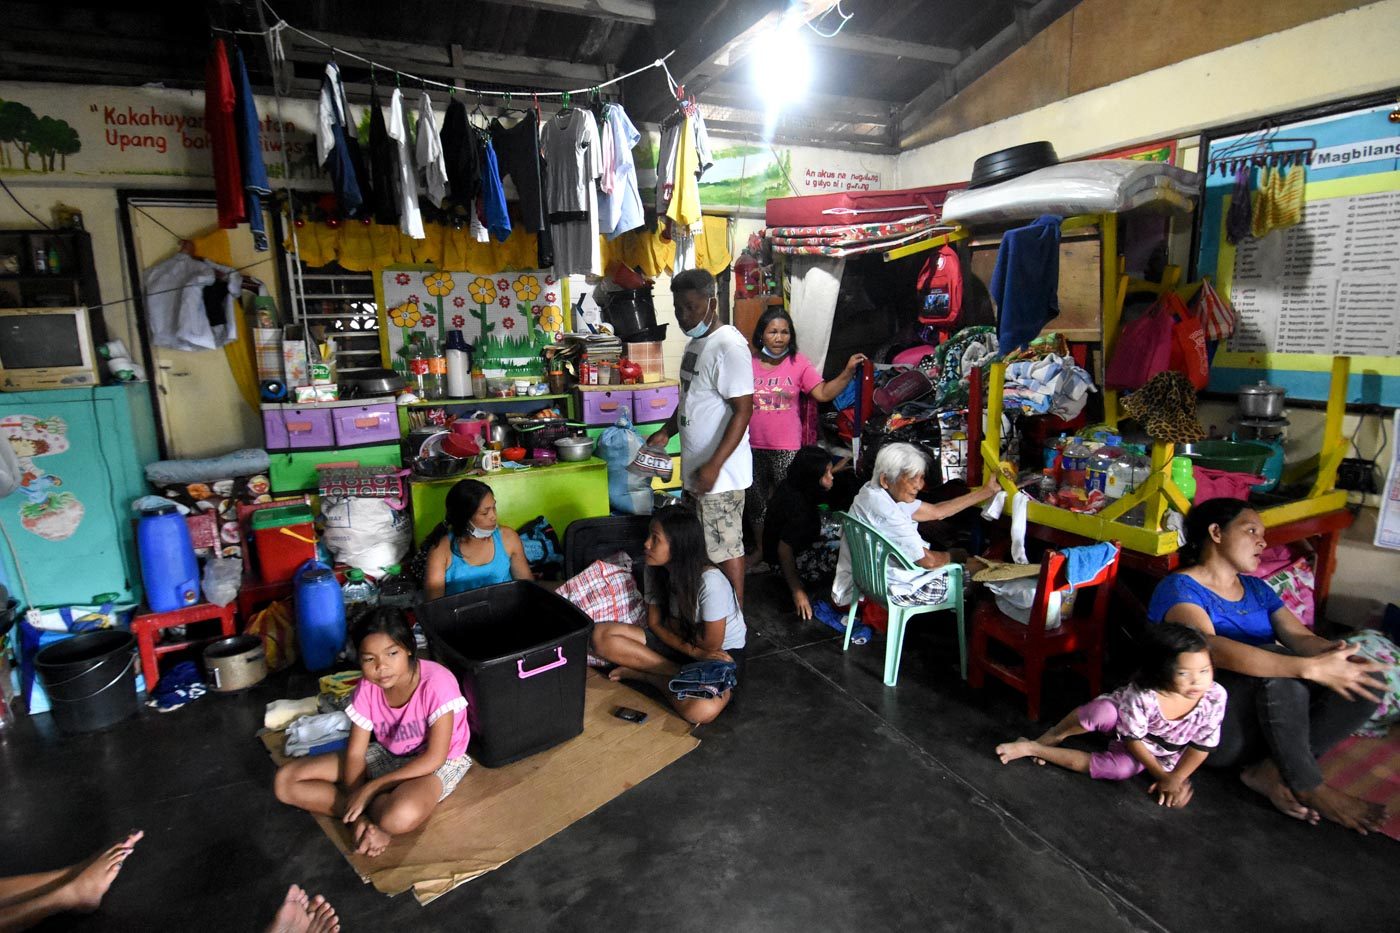 Government allocates P404 million to cover 3-month stay of Mayon evacuees